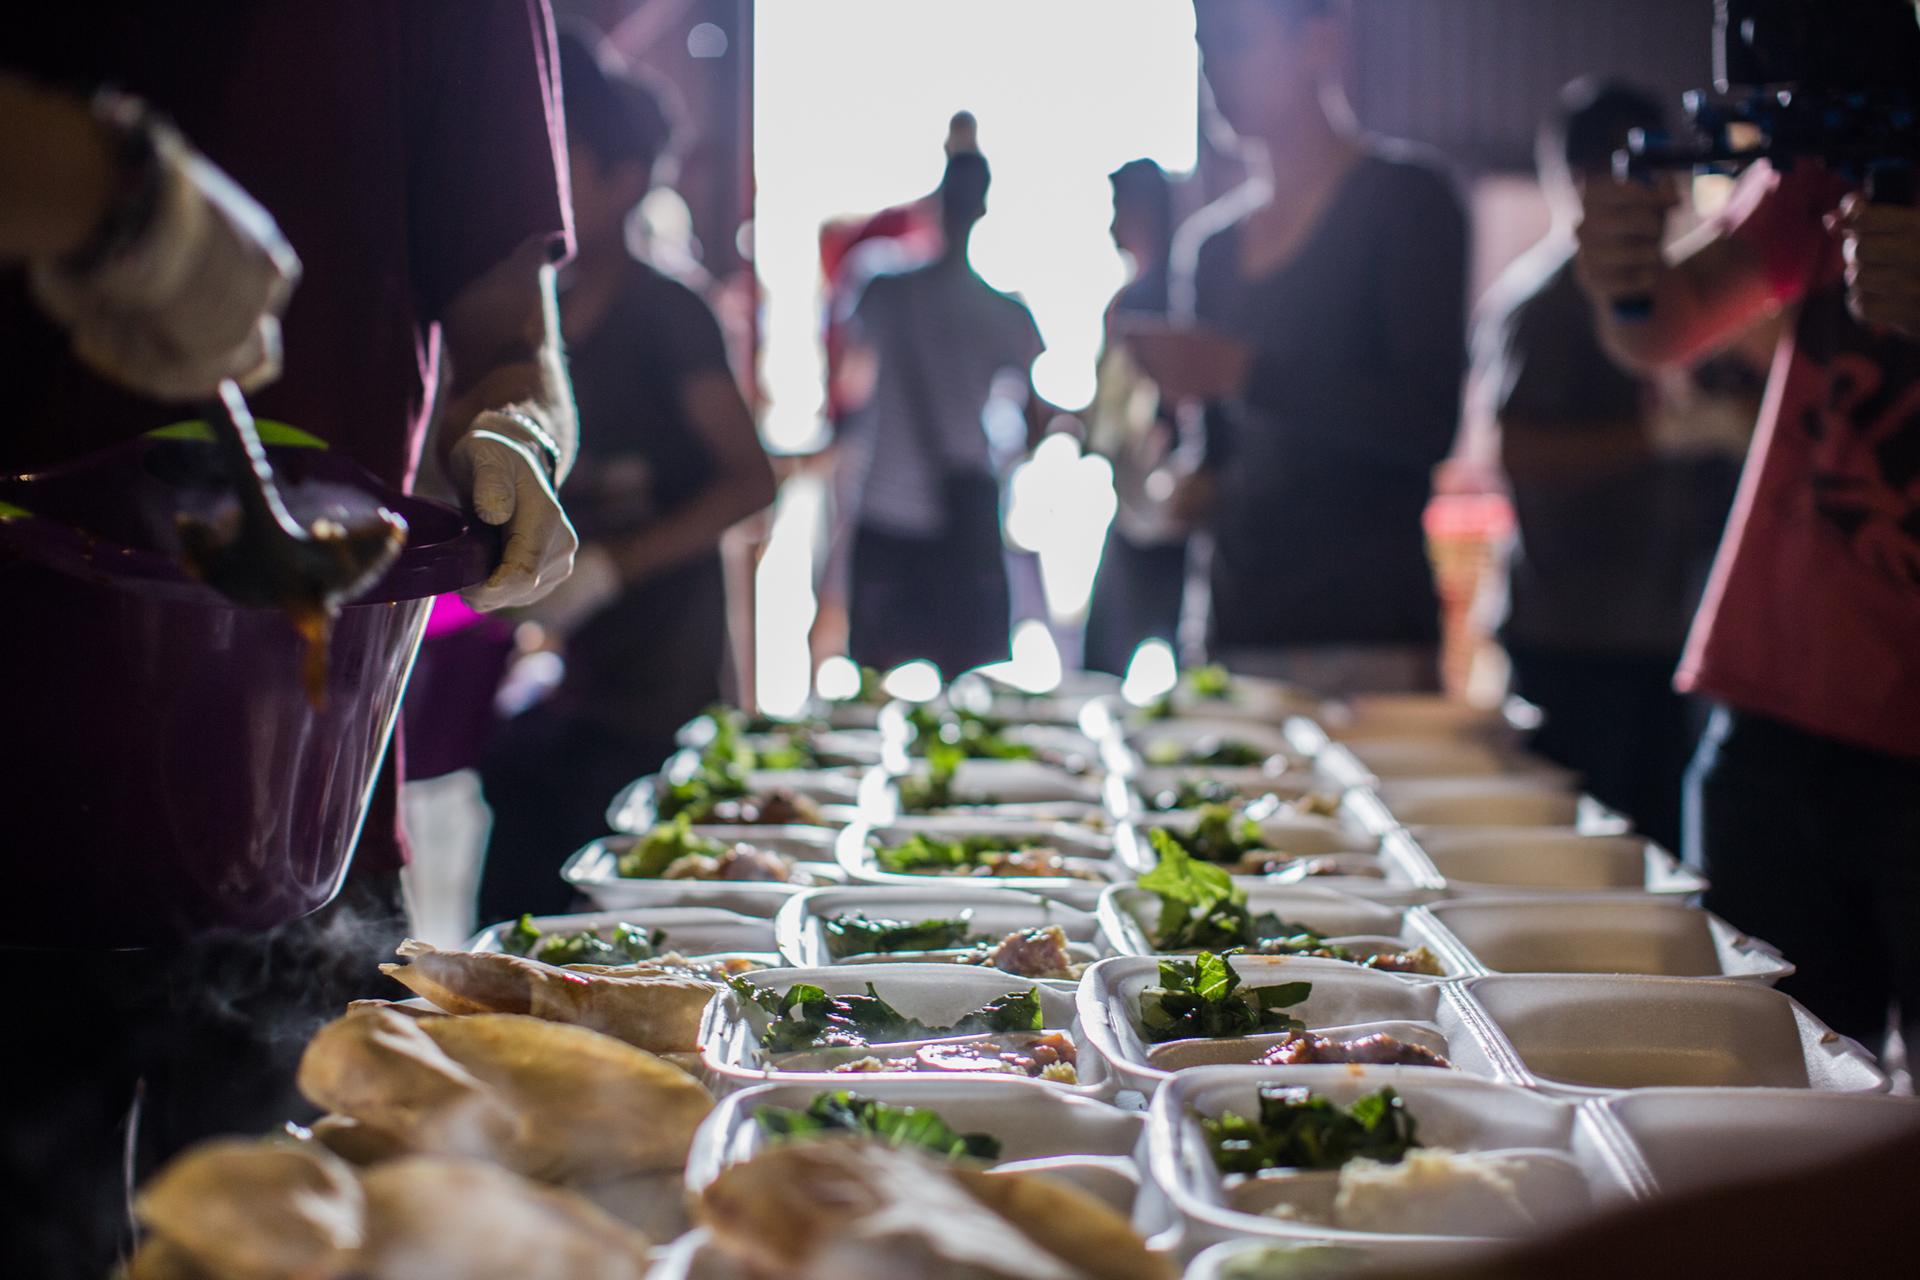 Pireaus, Athens, on the first day of the lunch distrubition program, cooking for 1500 people, we made hummus and salad, refugees and volunteers from over 10 countries worked, danced, and cleaned all day, a moment we will always remember.